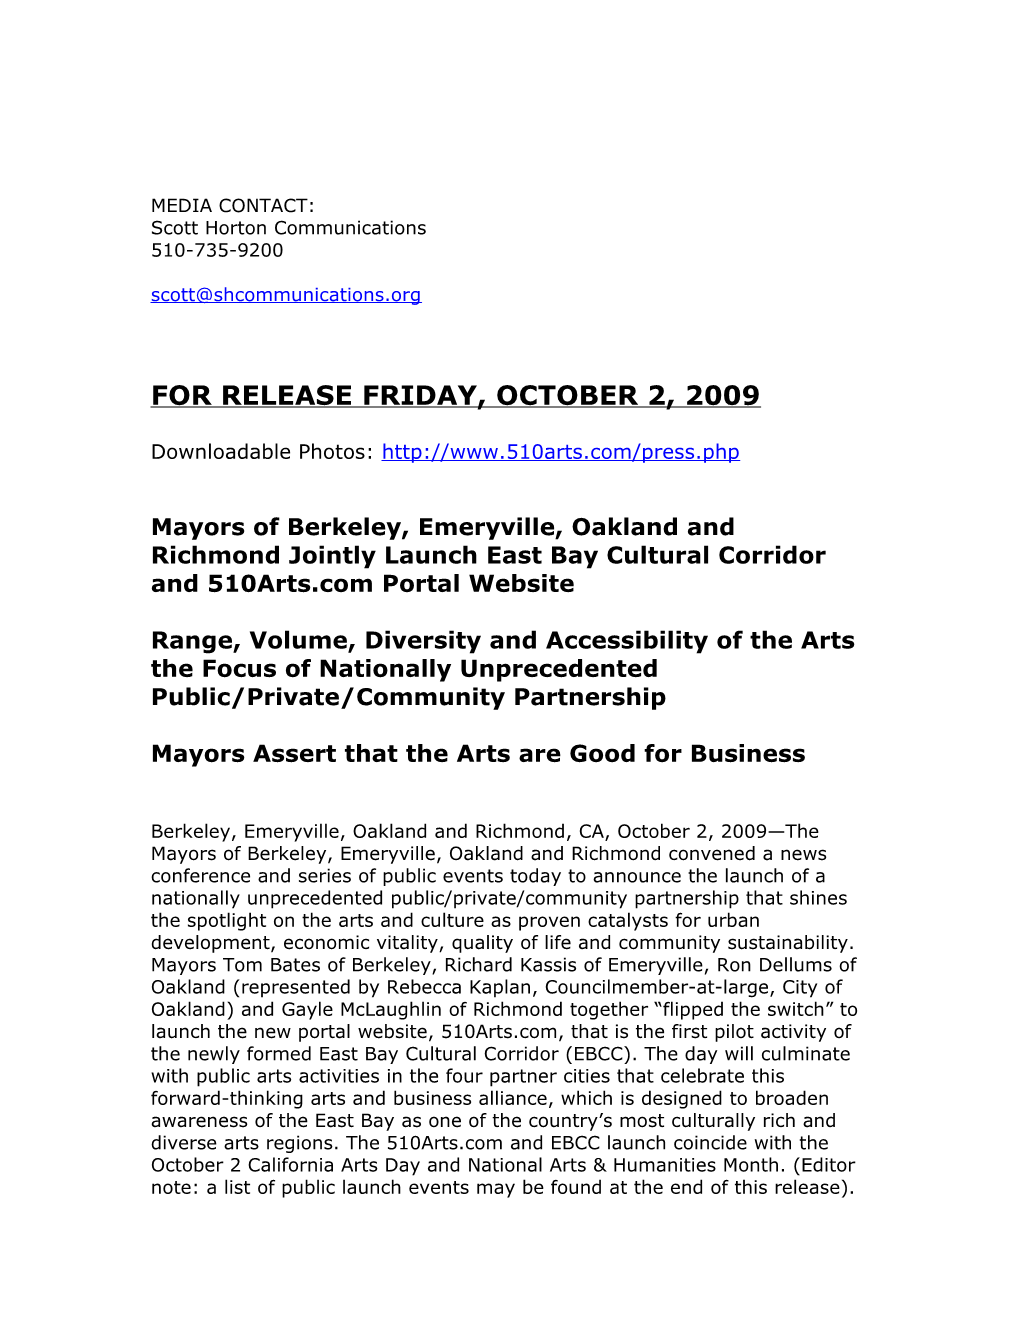 Mayors Assert That the Arts Are Good for Business